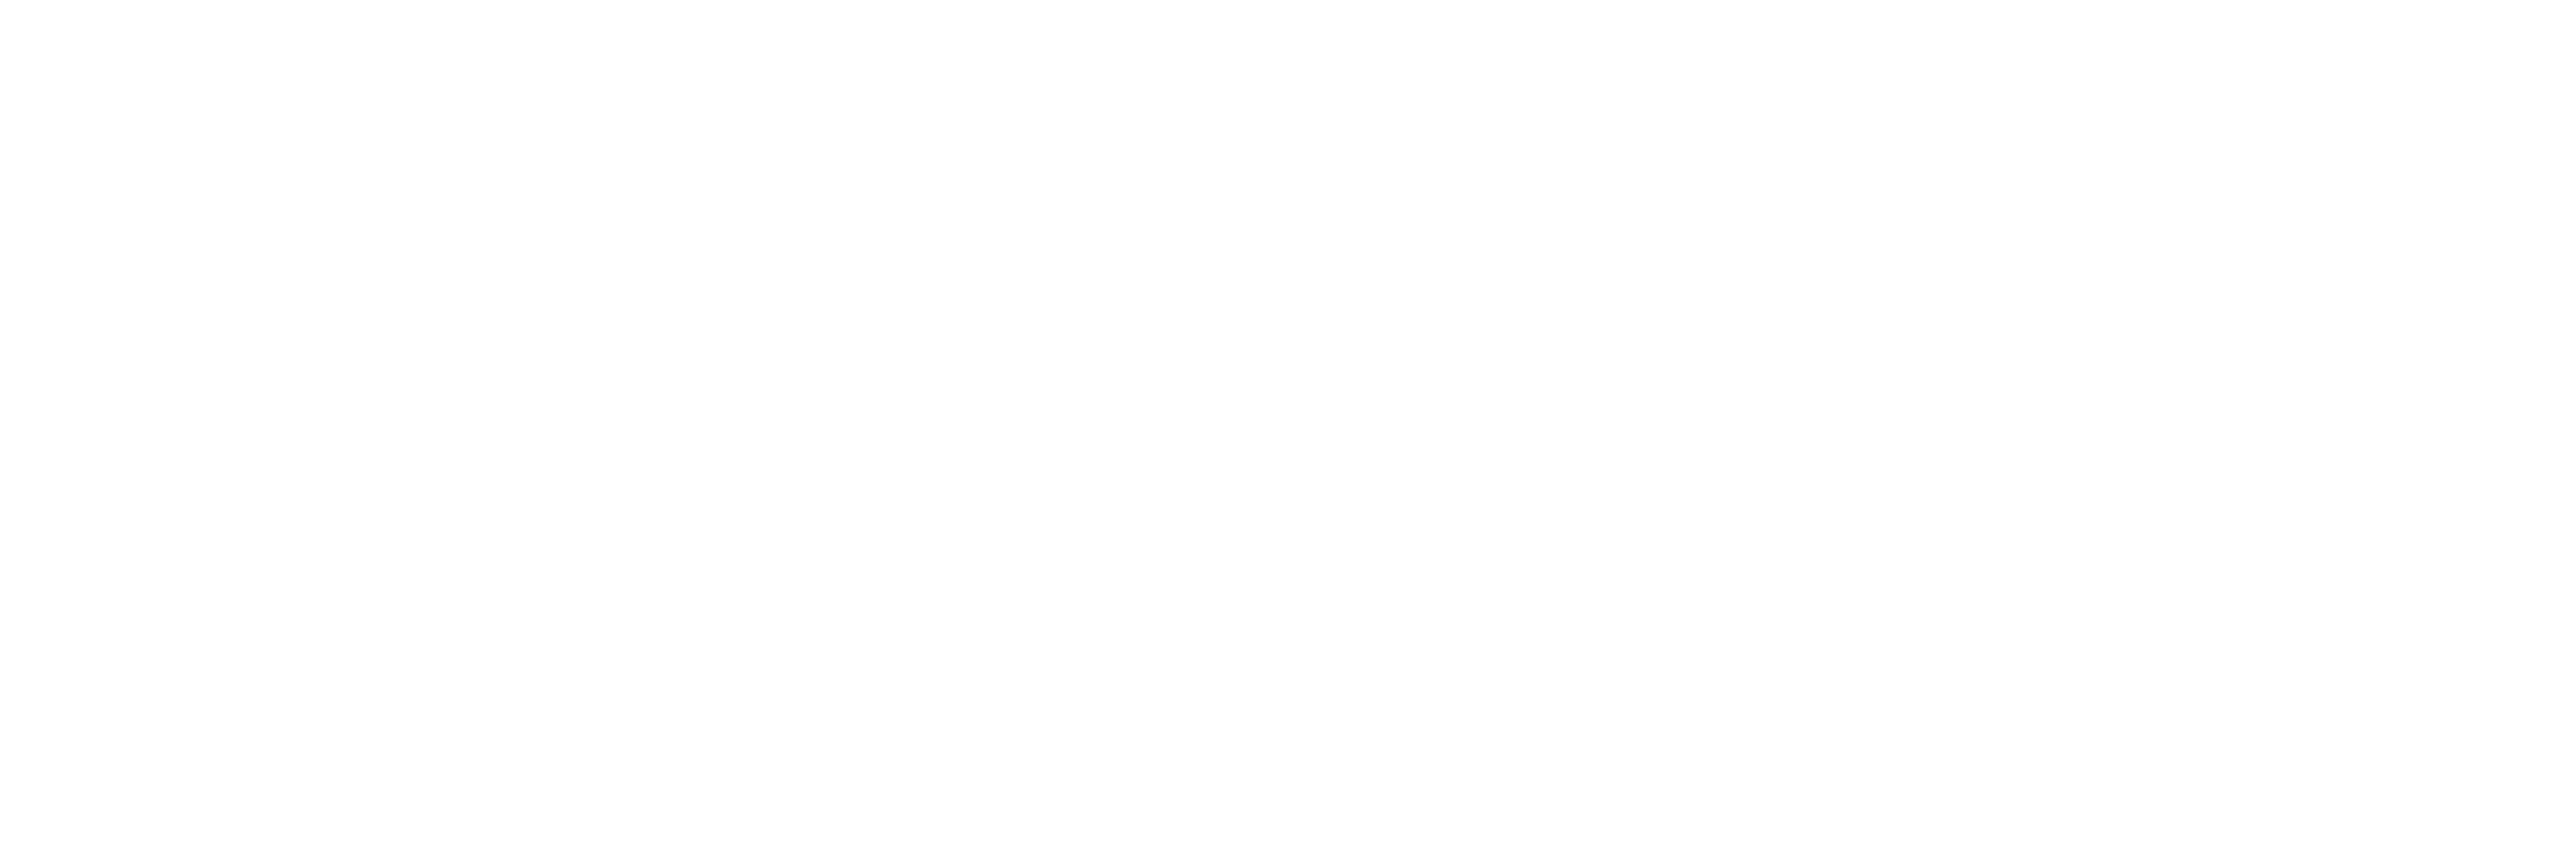 White Tooth by Tooth Orthodontics Logo